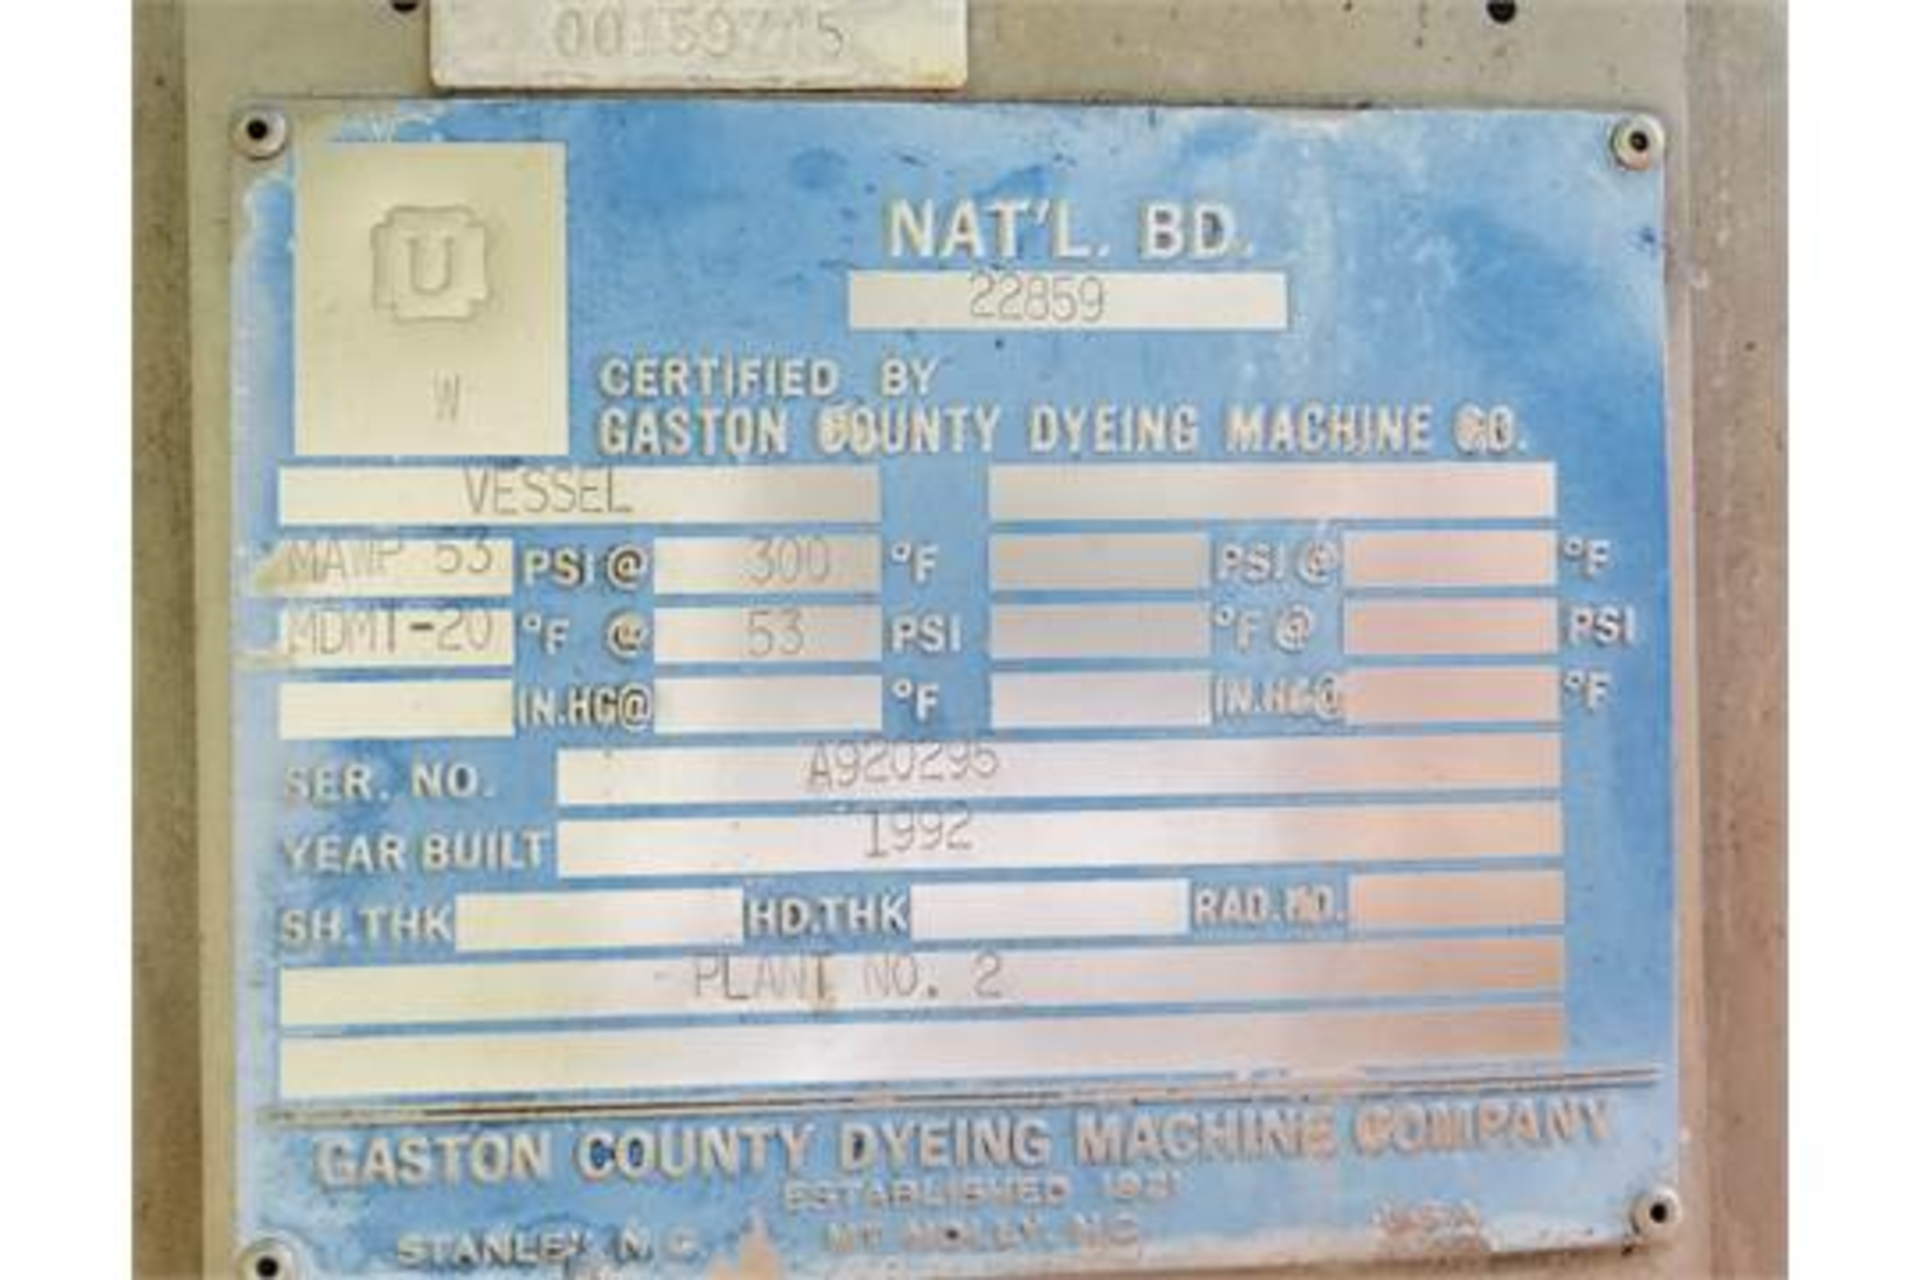 2 Port Gaston County Dye Jet MAWP 53 PSI @ 300 F Built in 1992 Serial Number: A920295 Stainless - Image 3 of 3